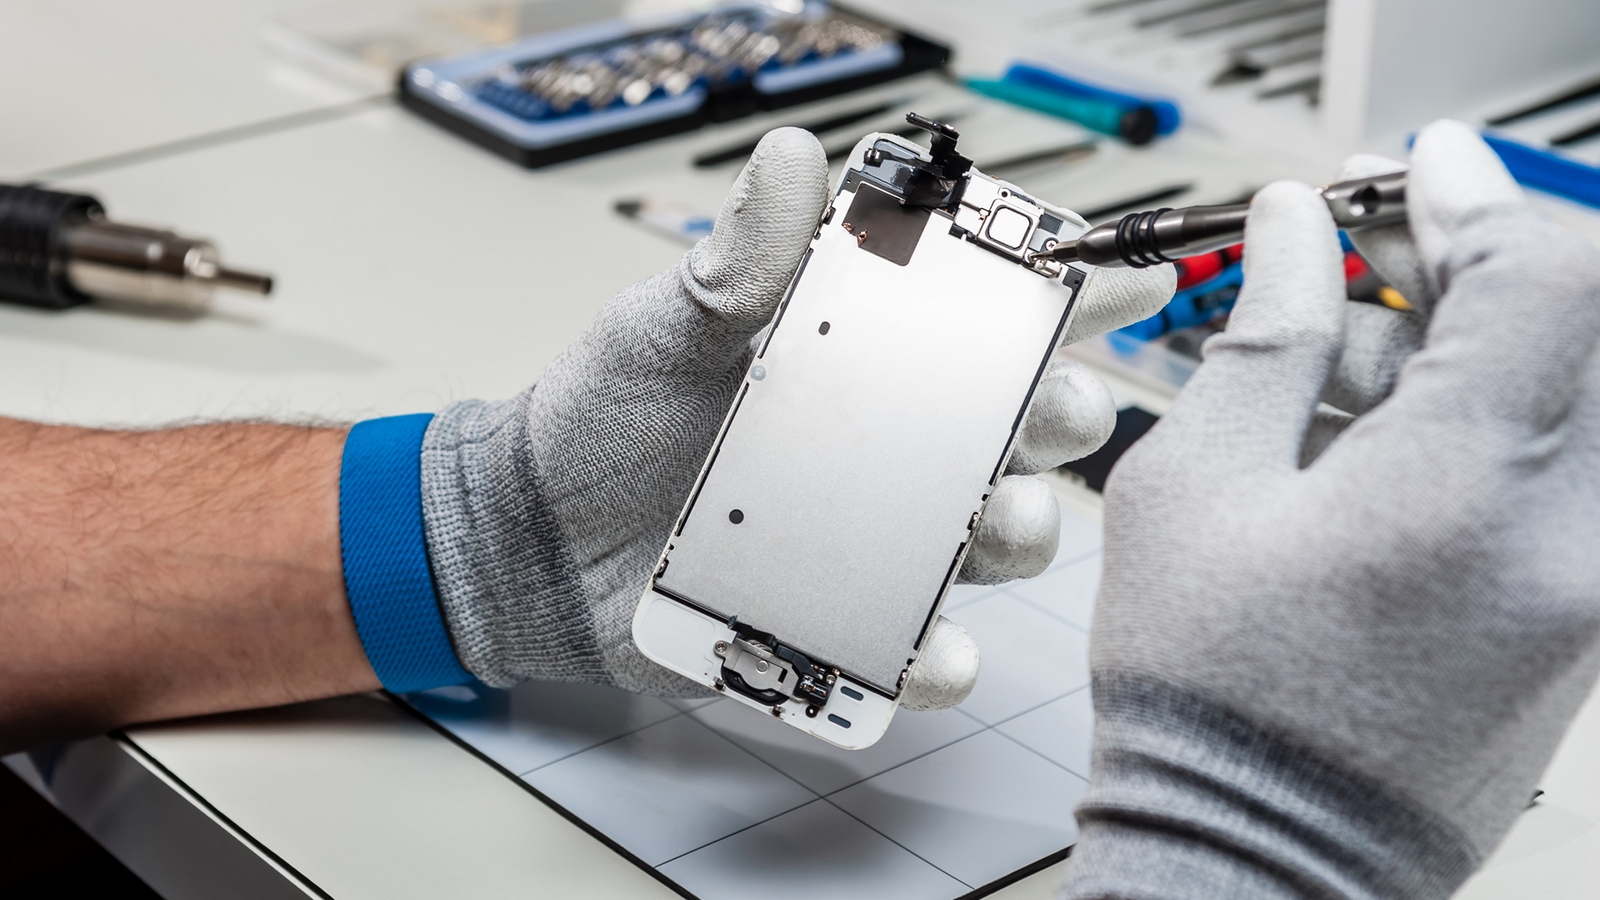 With iOS 15.2 released, Apple will protect iPhone owners from unscrupulous repairers